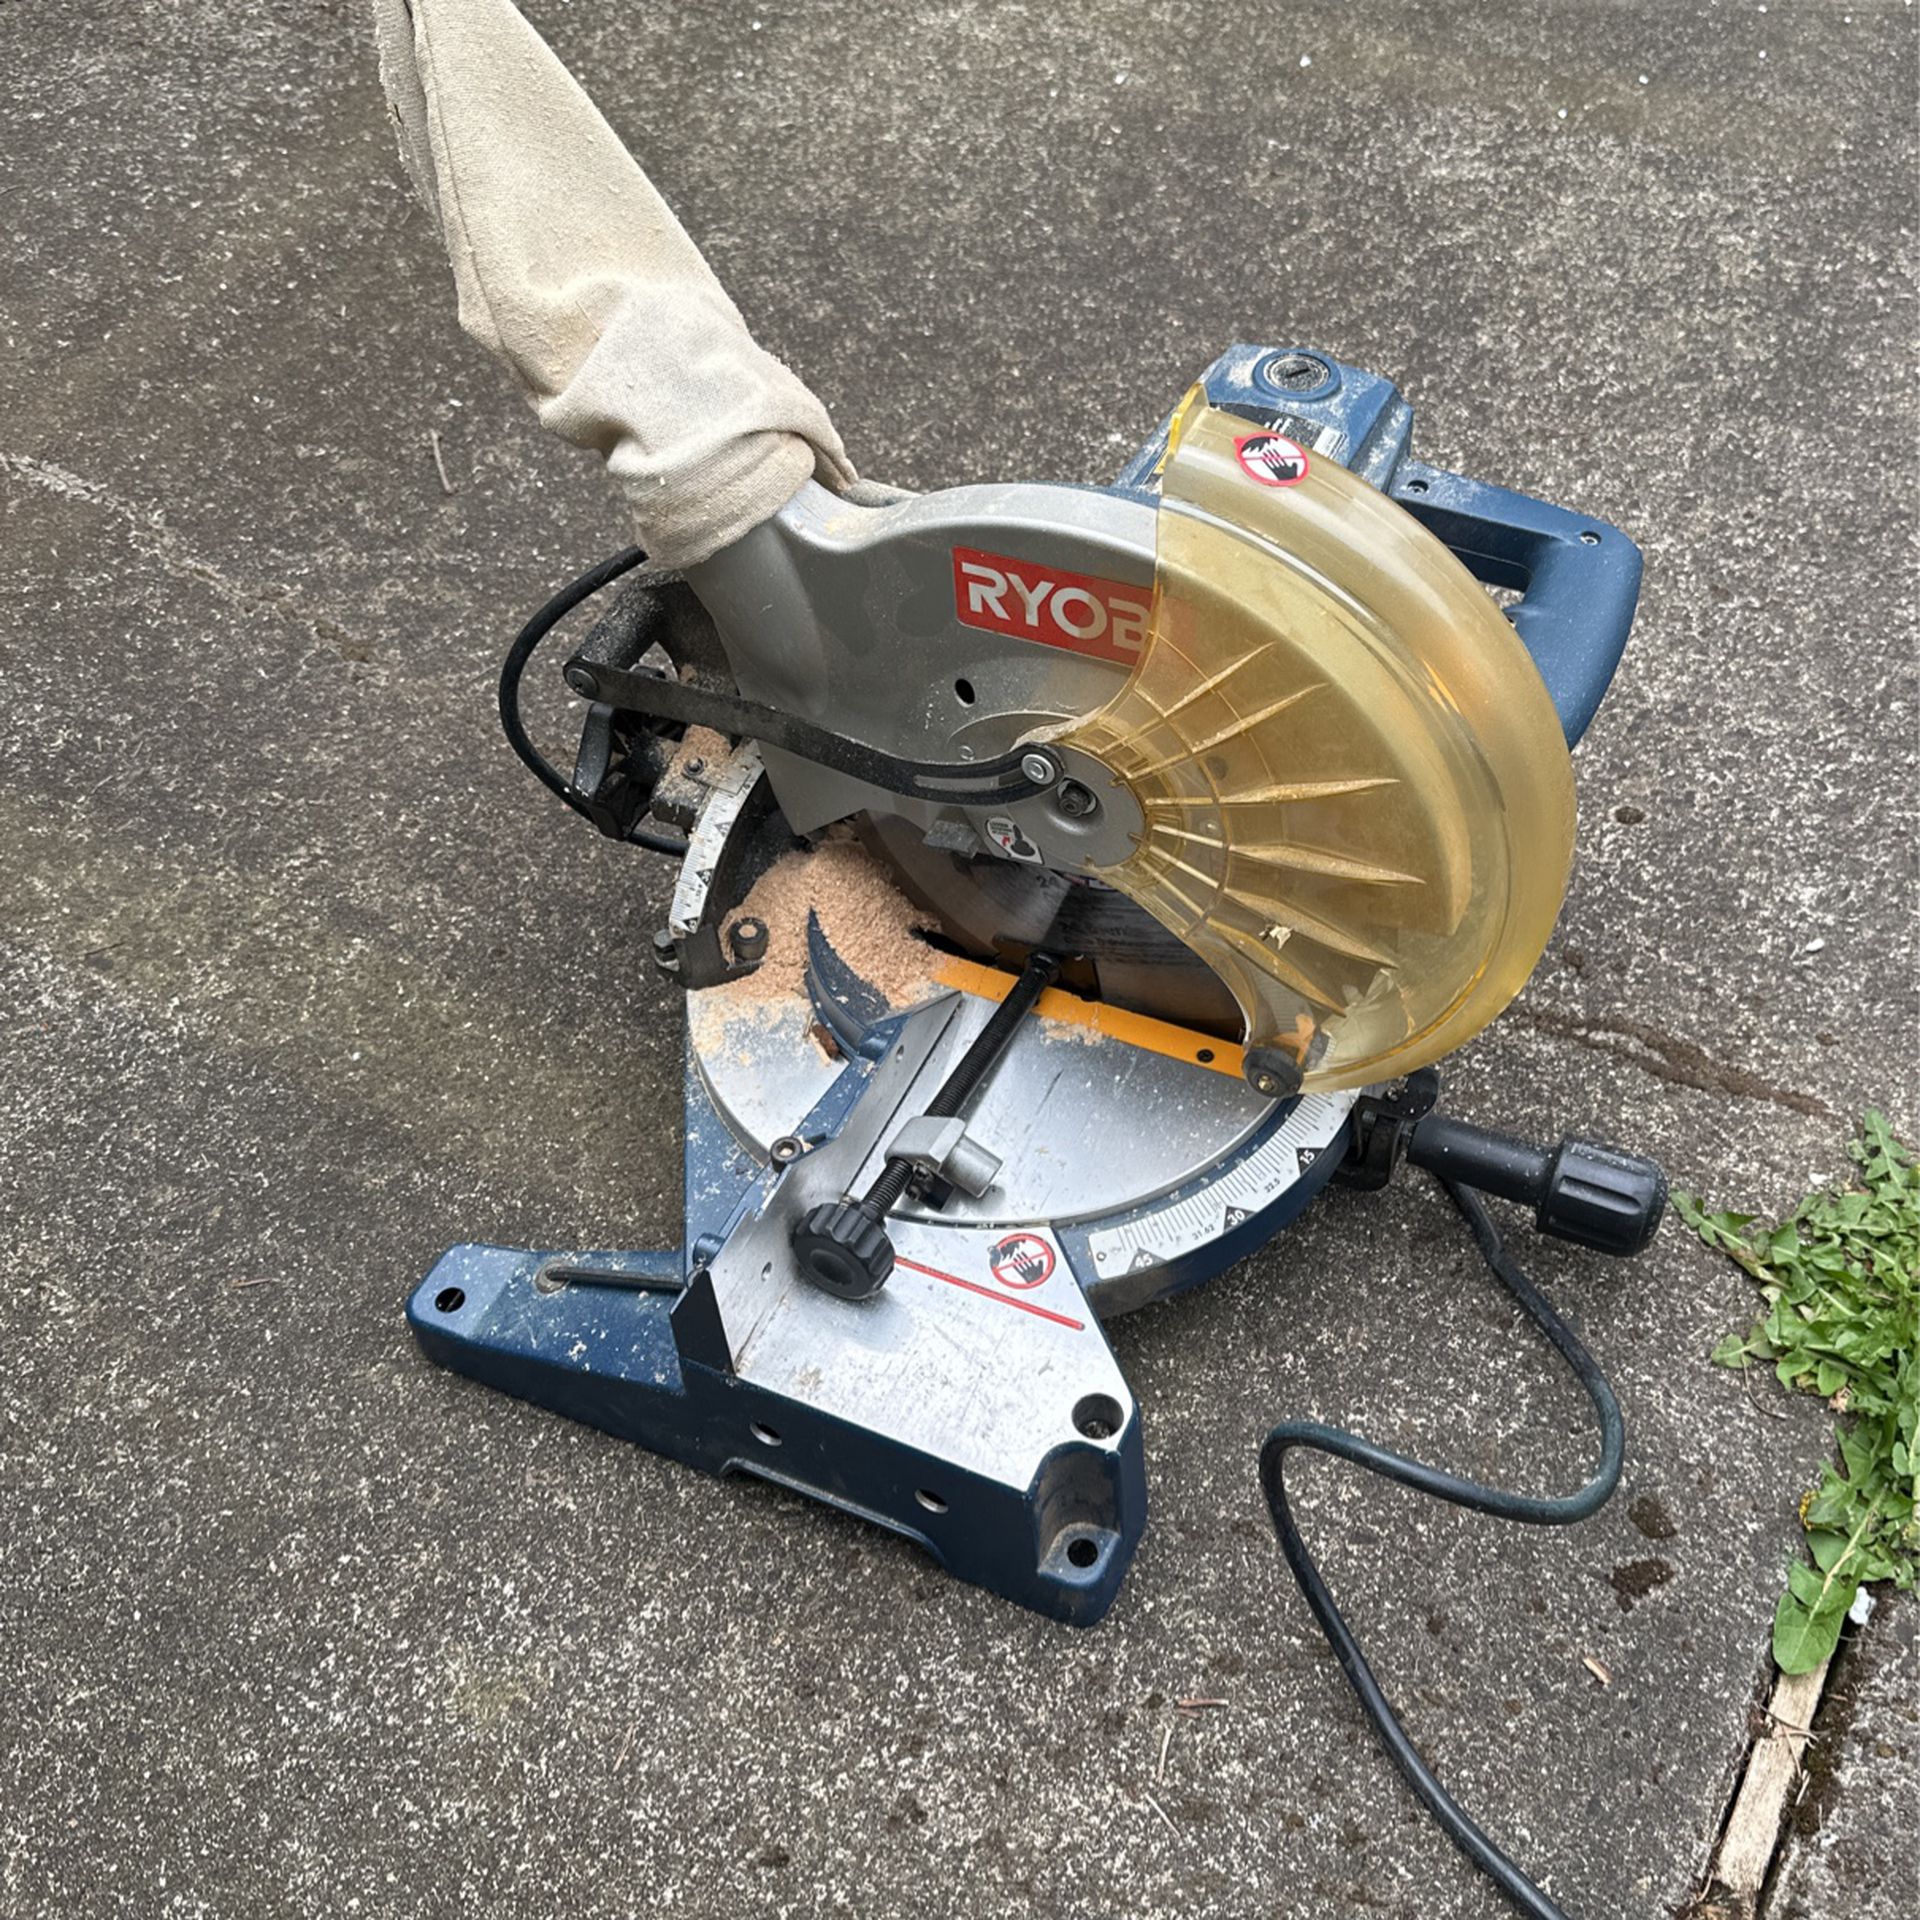 Ryobi compound miter saw 10"  TS1340 and work clamp and dust bag